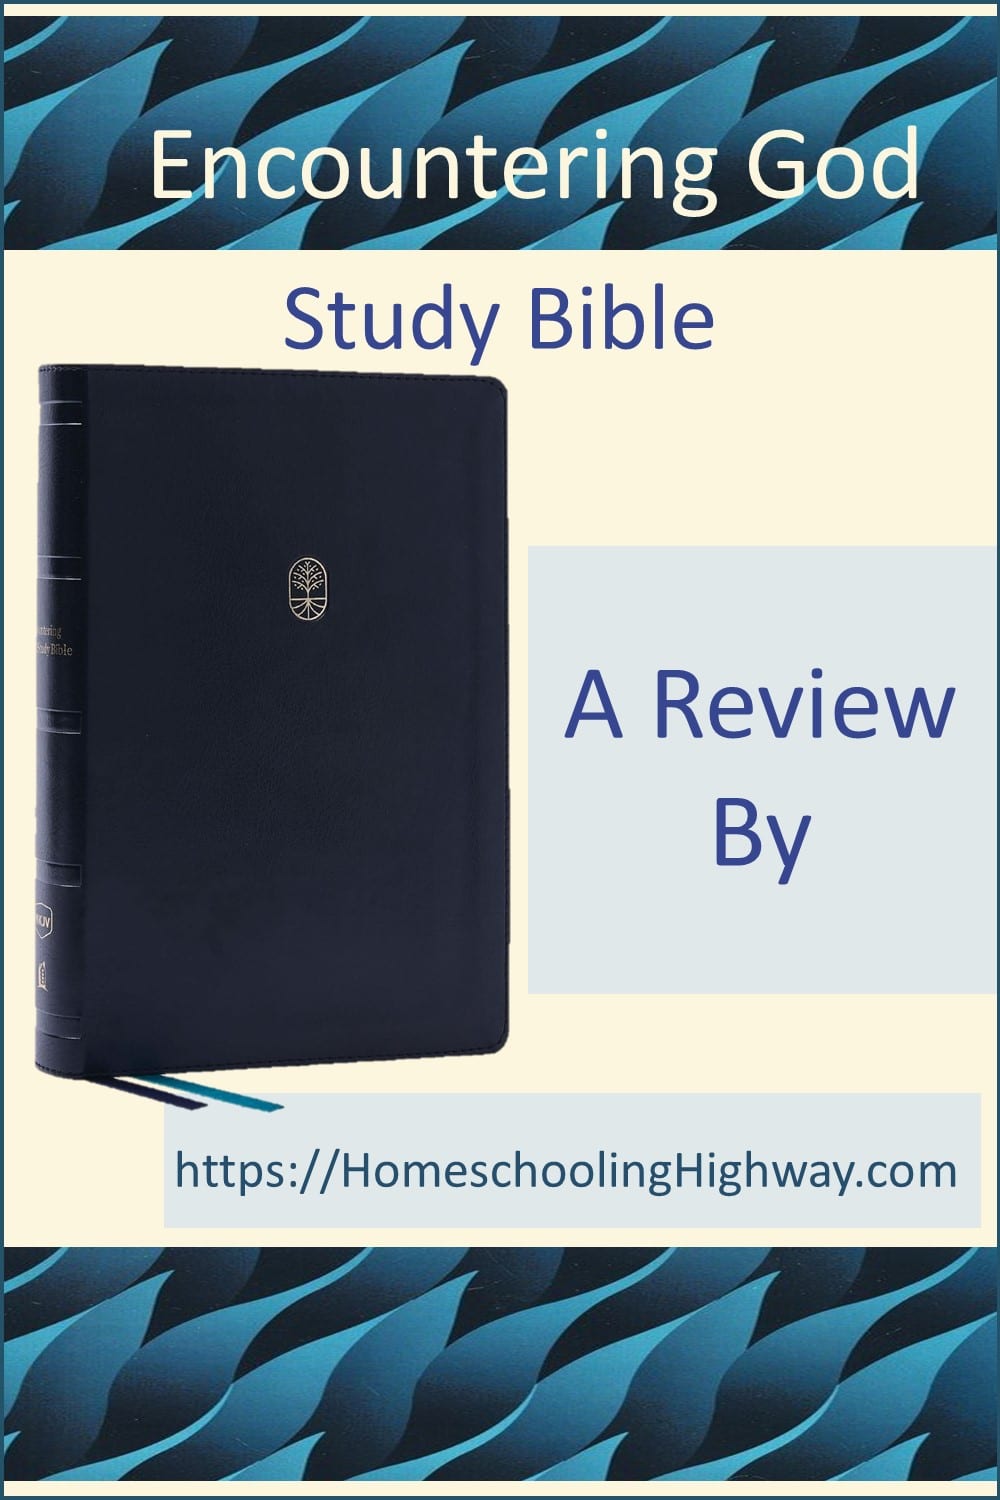 The Encountering God Study Bible published by Thomas Nelson. Bible features reviewed by Homeschooling Highway